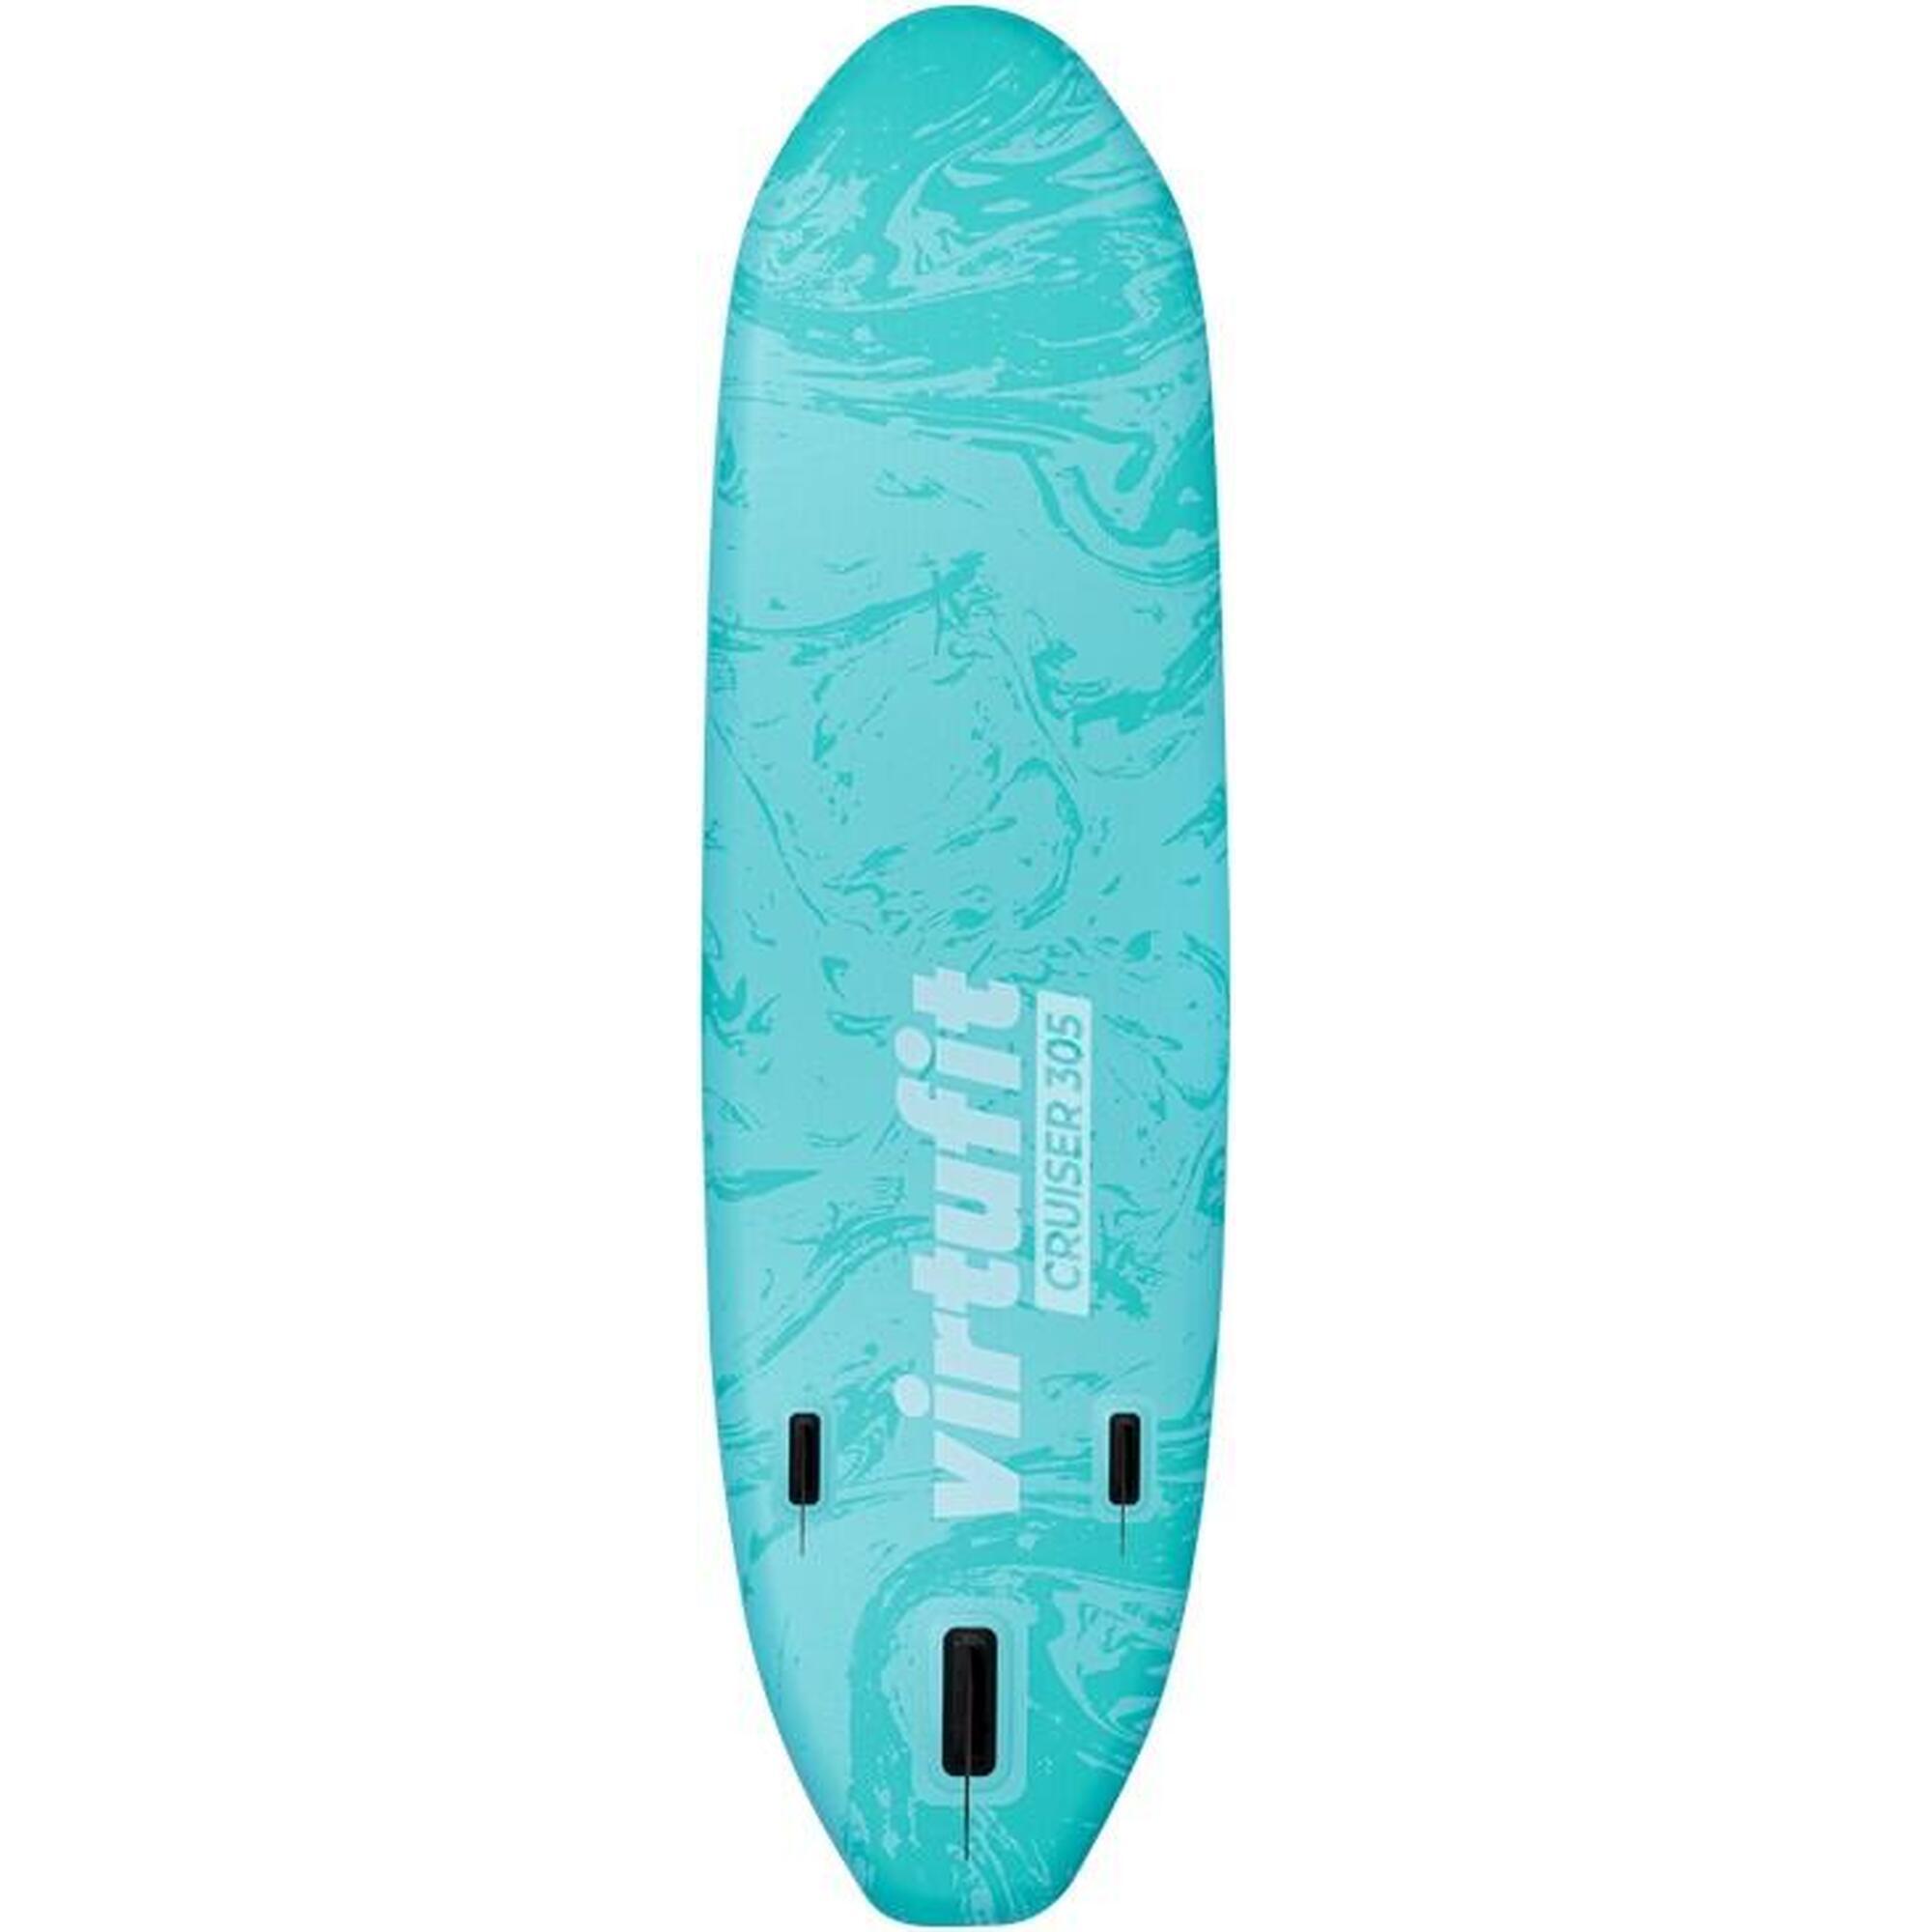 Stand up paddle - Cruiser 305 - Avec accessoires